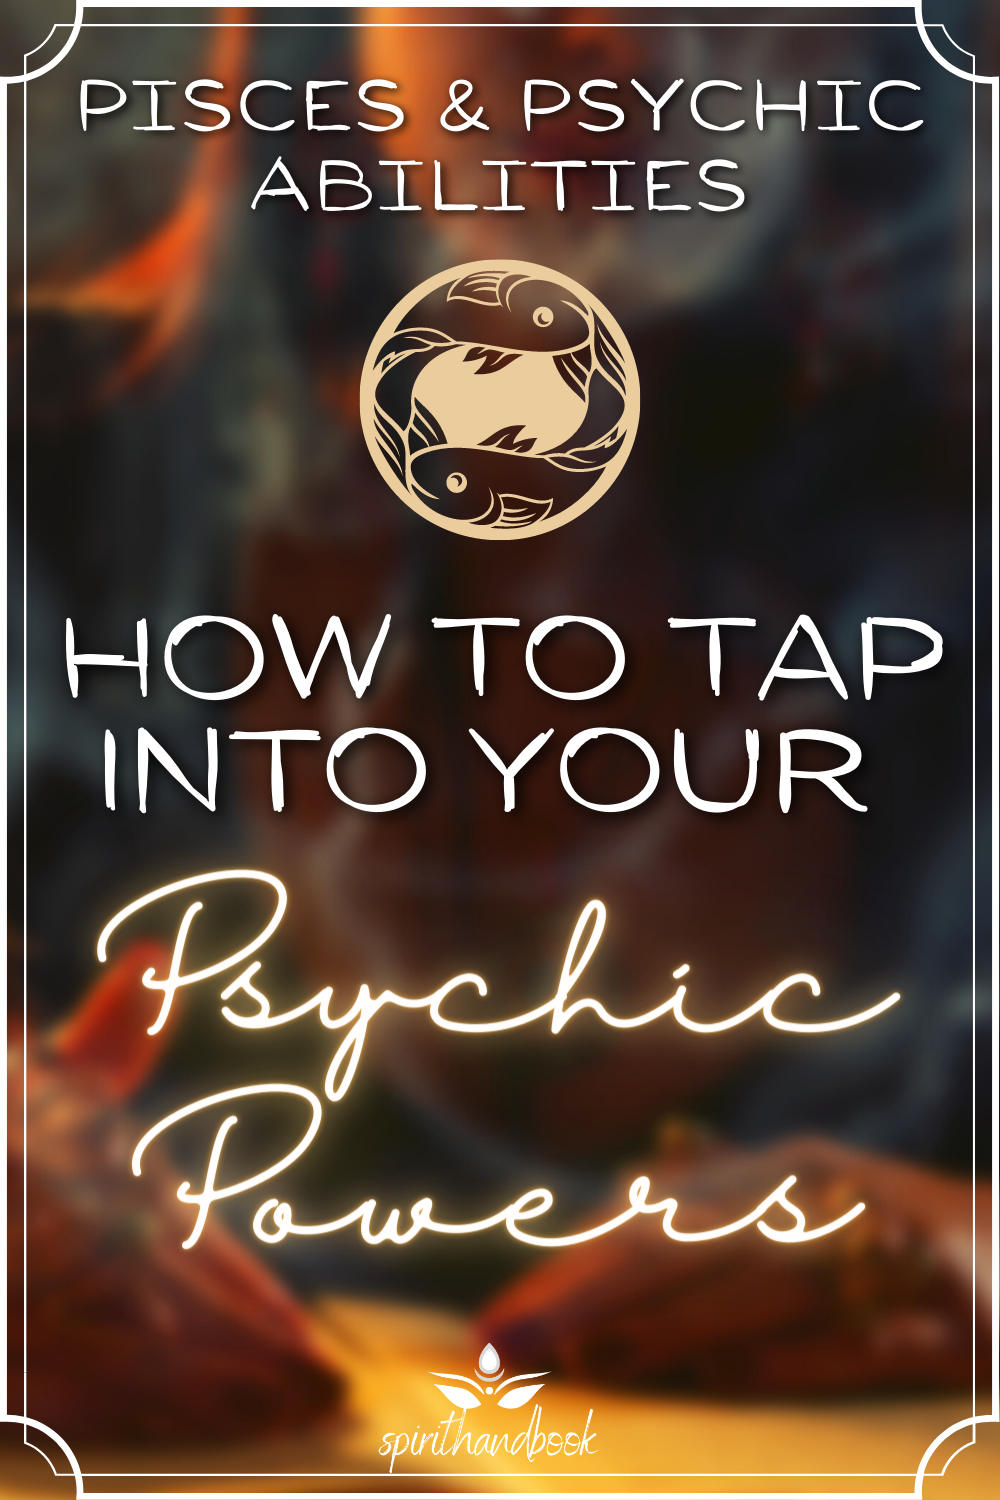 You are currently viewing Pisces and Psychic Abilities: How To Tap Into Your Psychic Powers